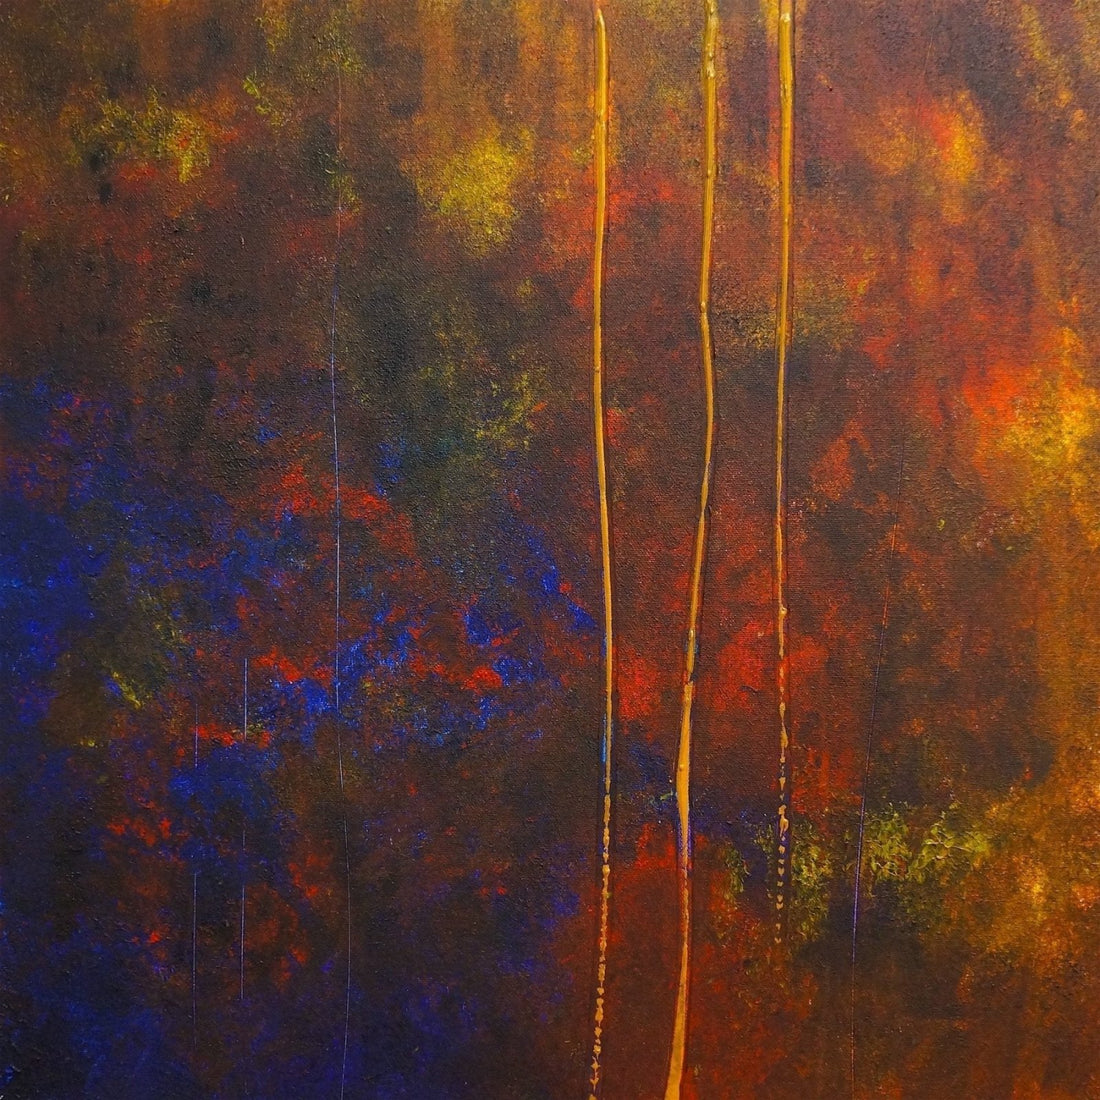 The Autumn Wood Abstract Painting Fine Art Prints | An Artwork from Scotland by Scottish Artist Hunter